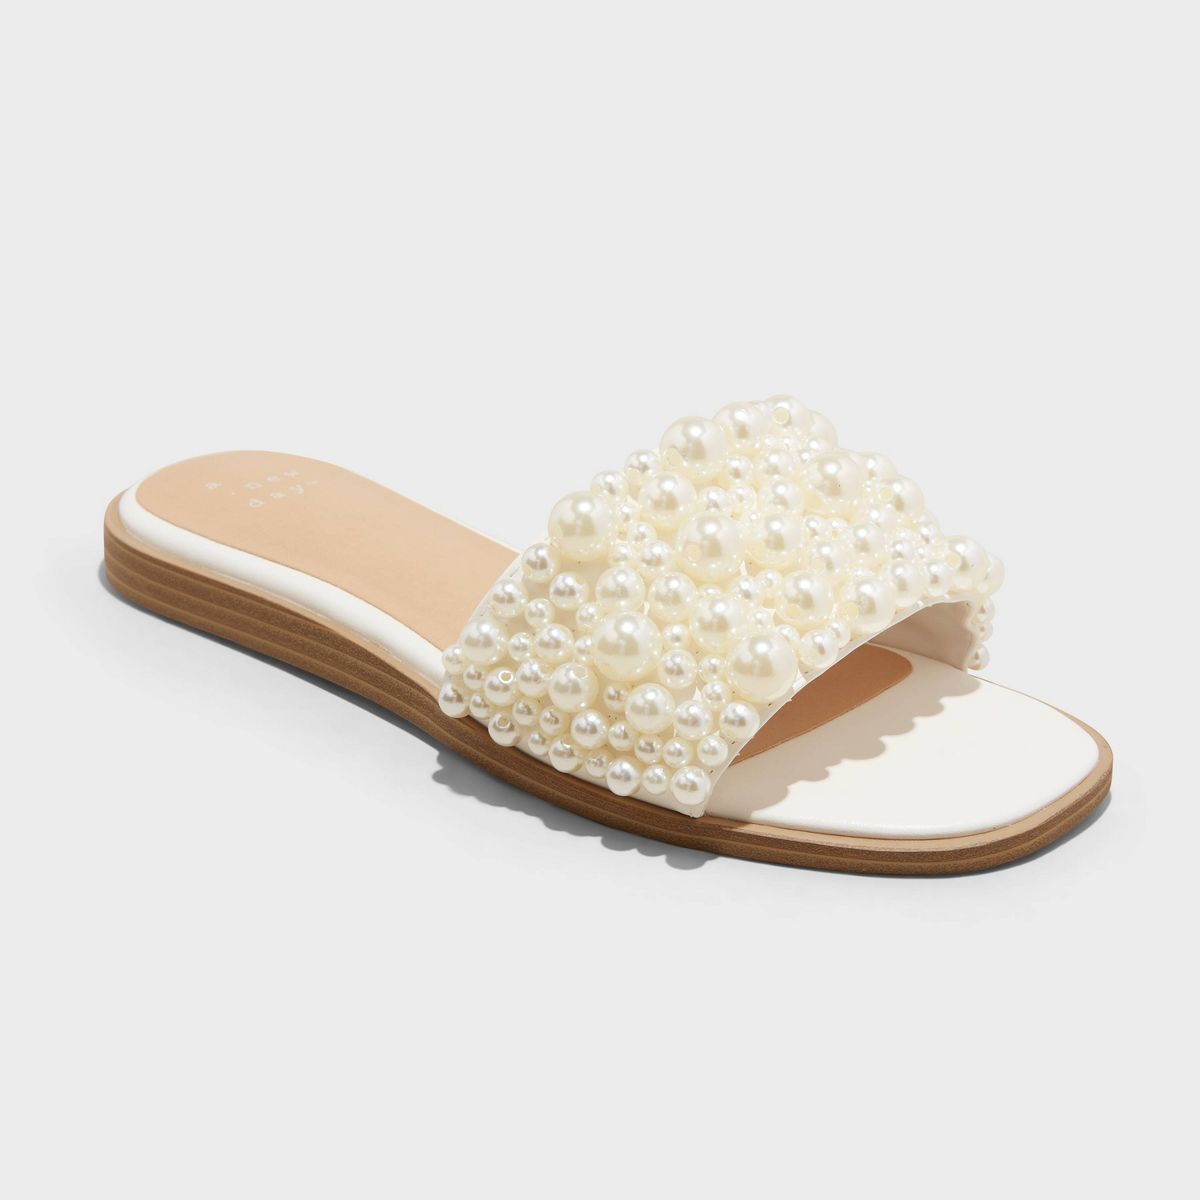 Women's Jasmine Pearl Slide Sandals with Memory Foam Insole - A New Day™ Cream 7.5 | Target